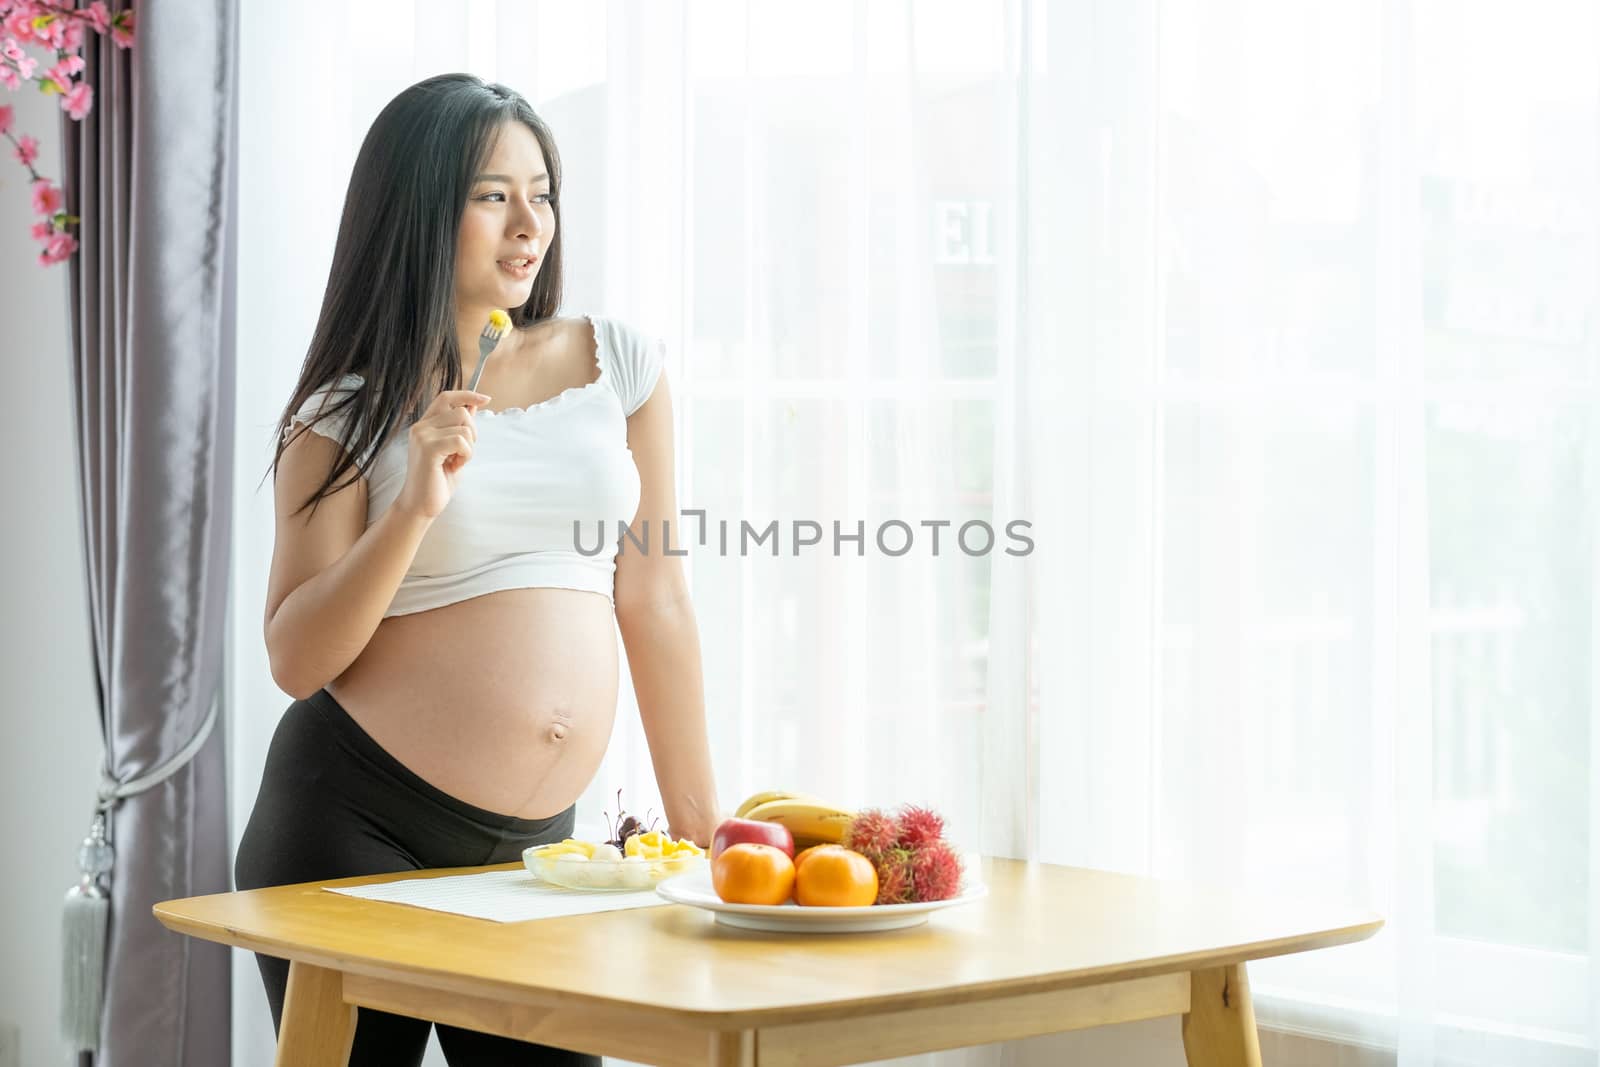 Beautiful pregnant woman hold folk with some fruits and stand near table with various types of fruits in front of curtain with morning light. Concept of good and healthy food for pregnant people.